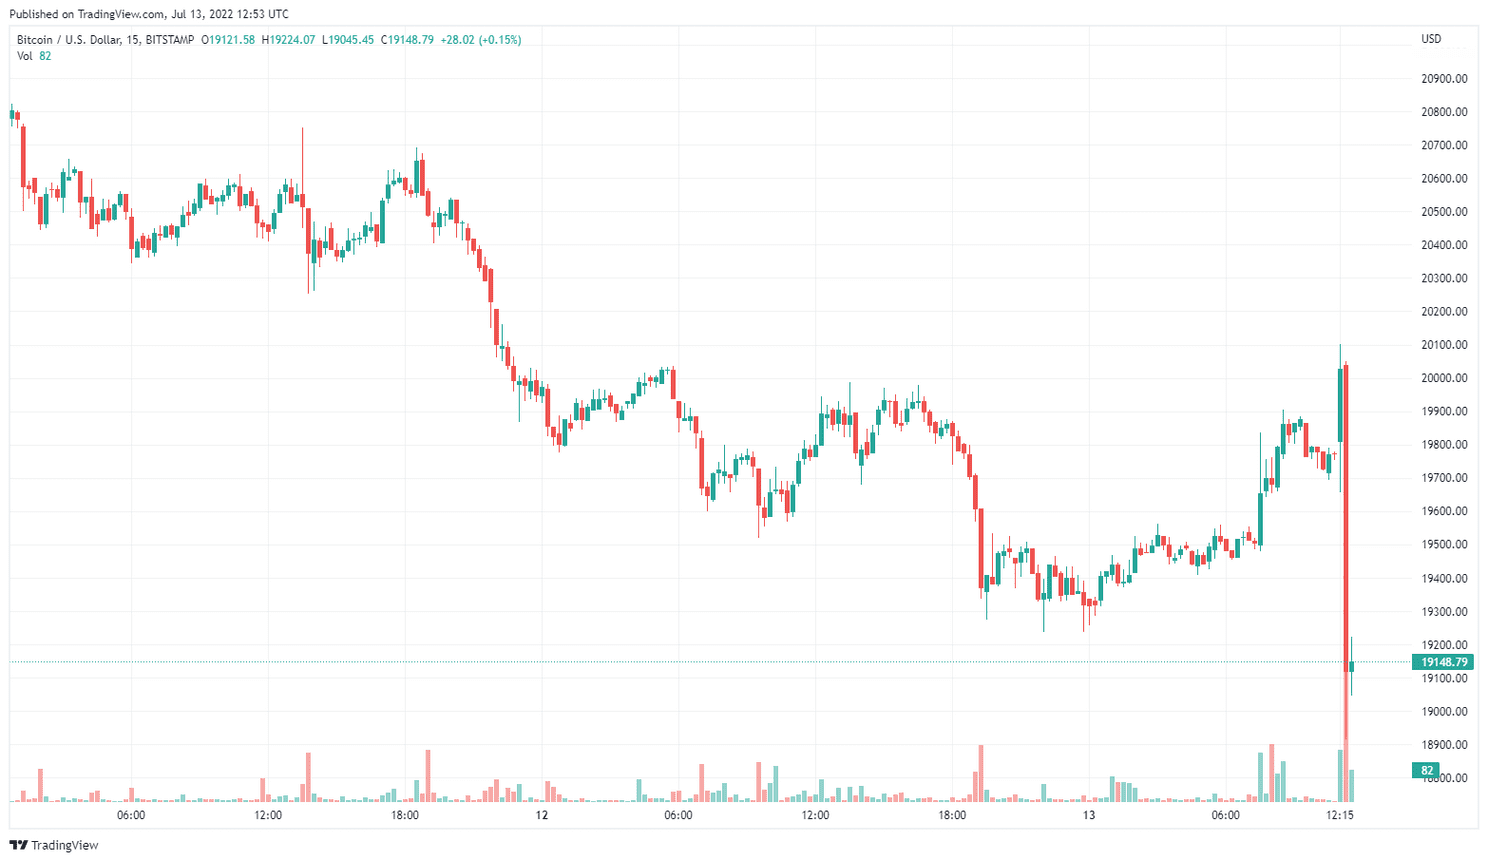 Bitcoin price reacts violently to new US figures